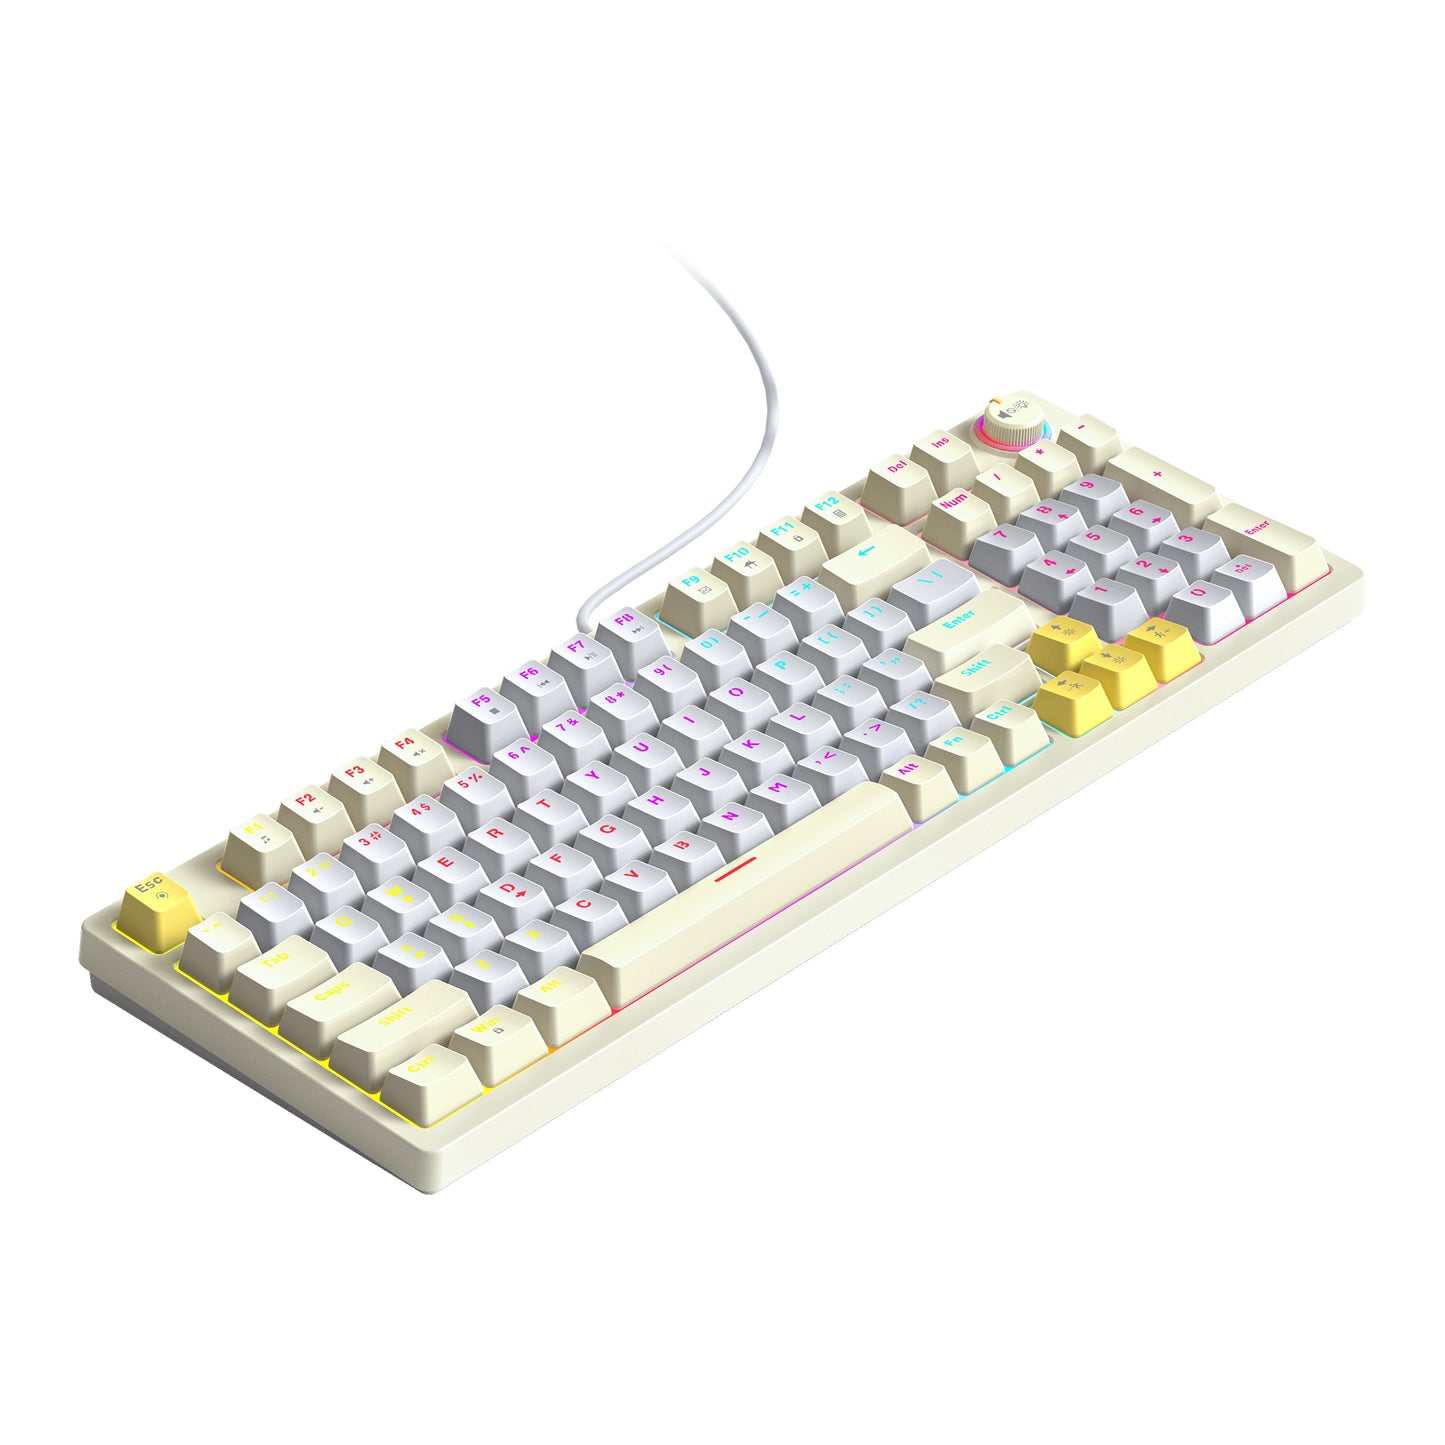 T-Wolf T50 Wired Mechanical Keyboard